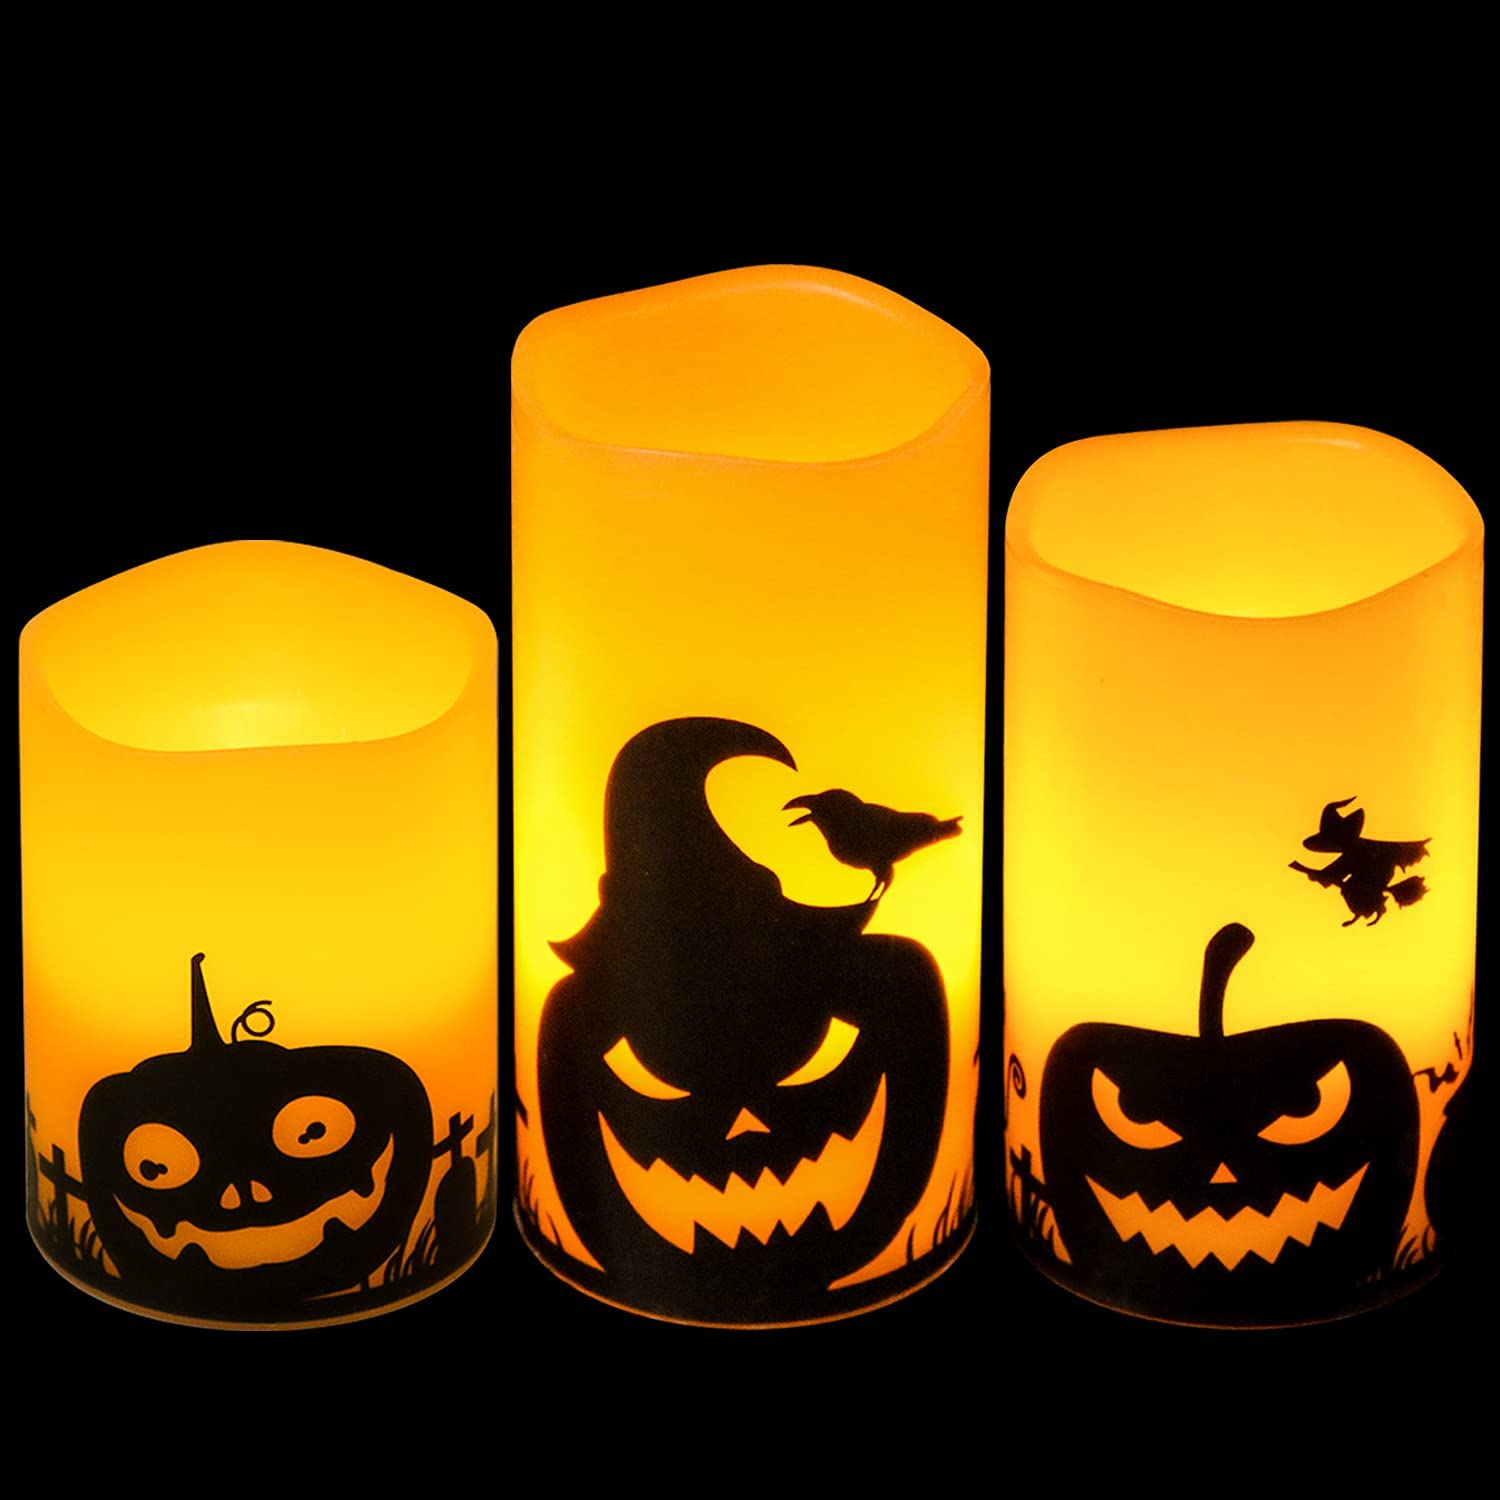 image of 3 halloween themed candles of varying heights with jack-o-lantern silhouettes on them. 